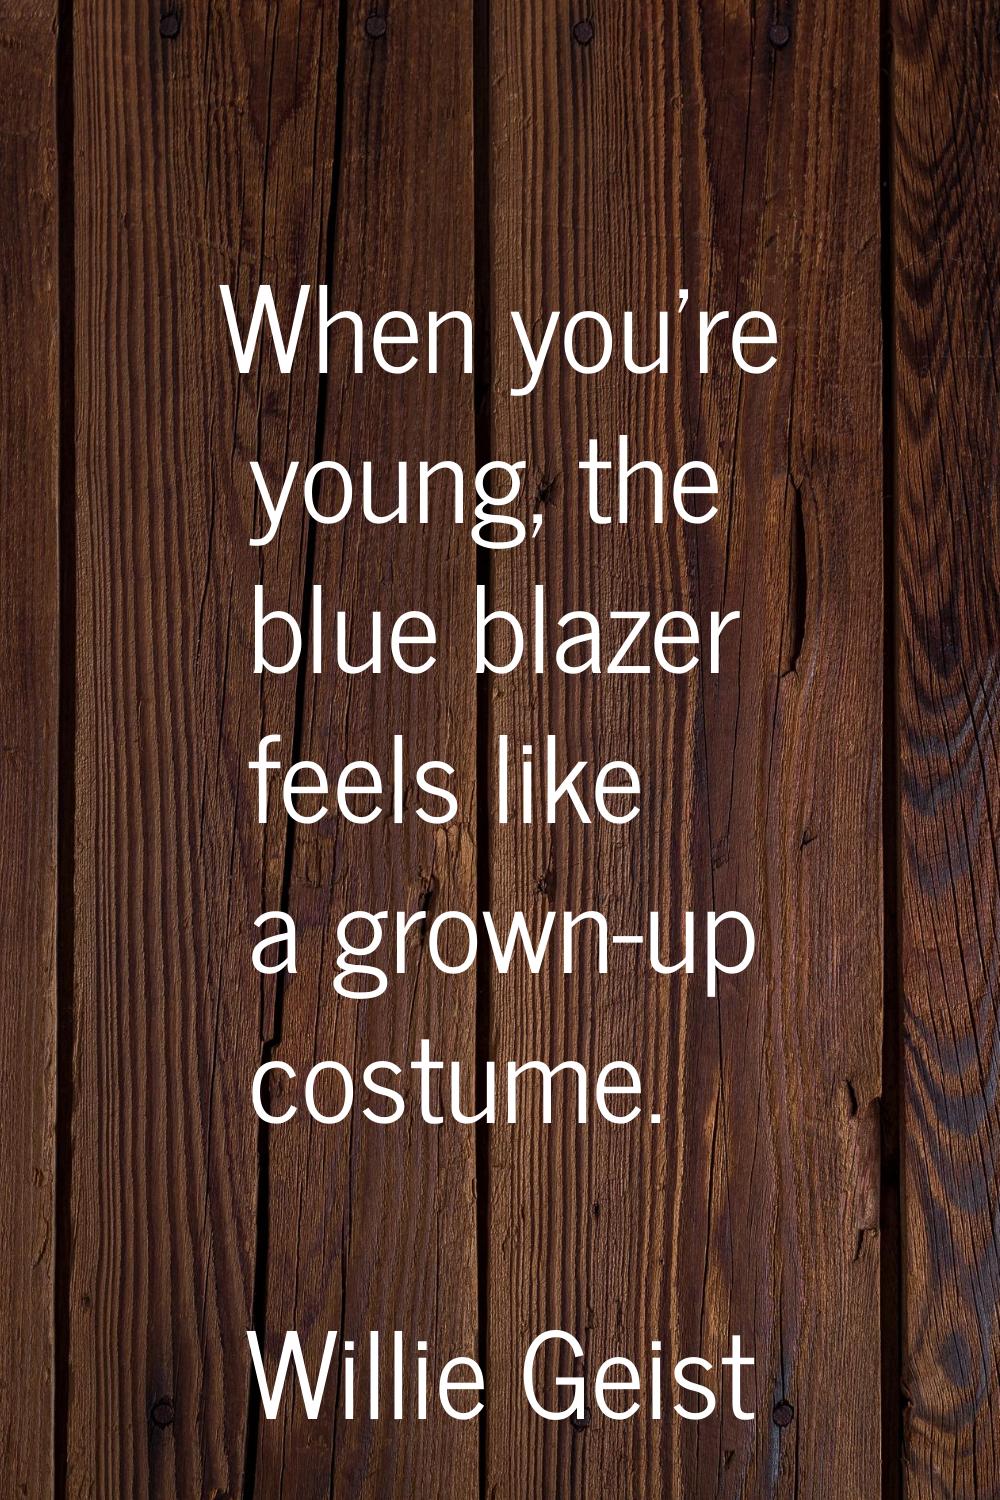 When you're young, the blue blazer feels like a grown-up costume.